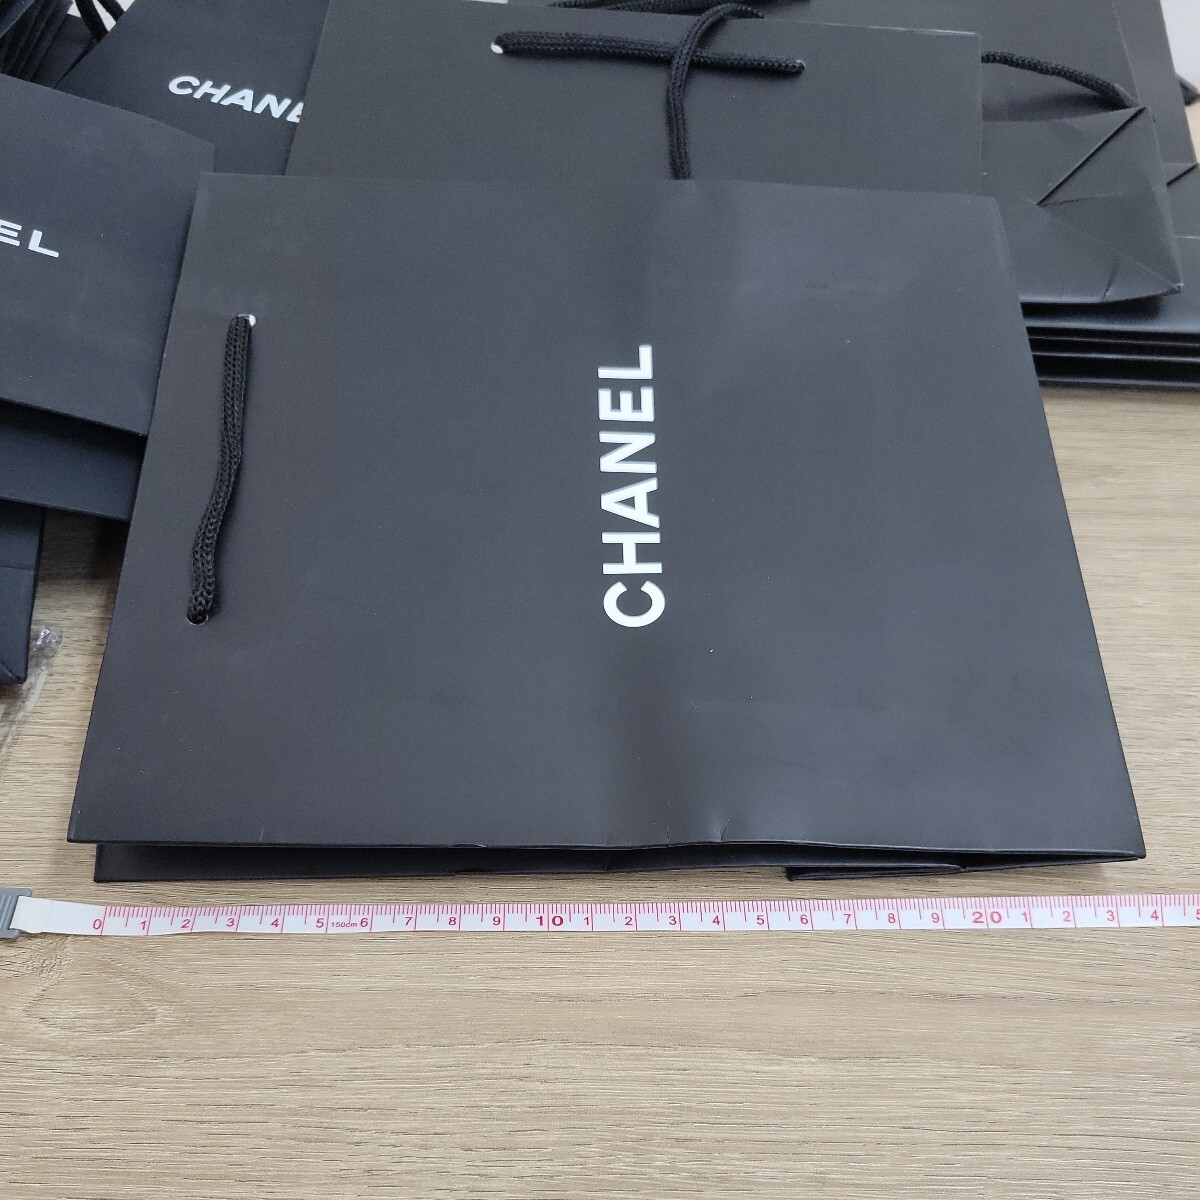  Chanel paper bag sack CHANEL small articles for storage bag accessory set summarize 